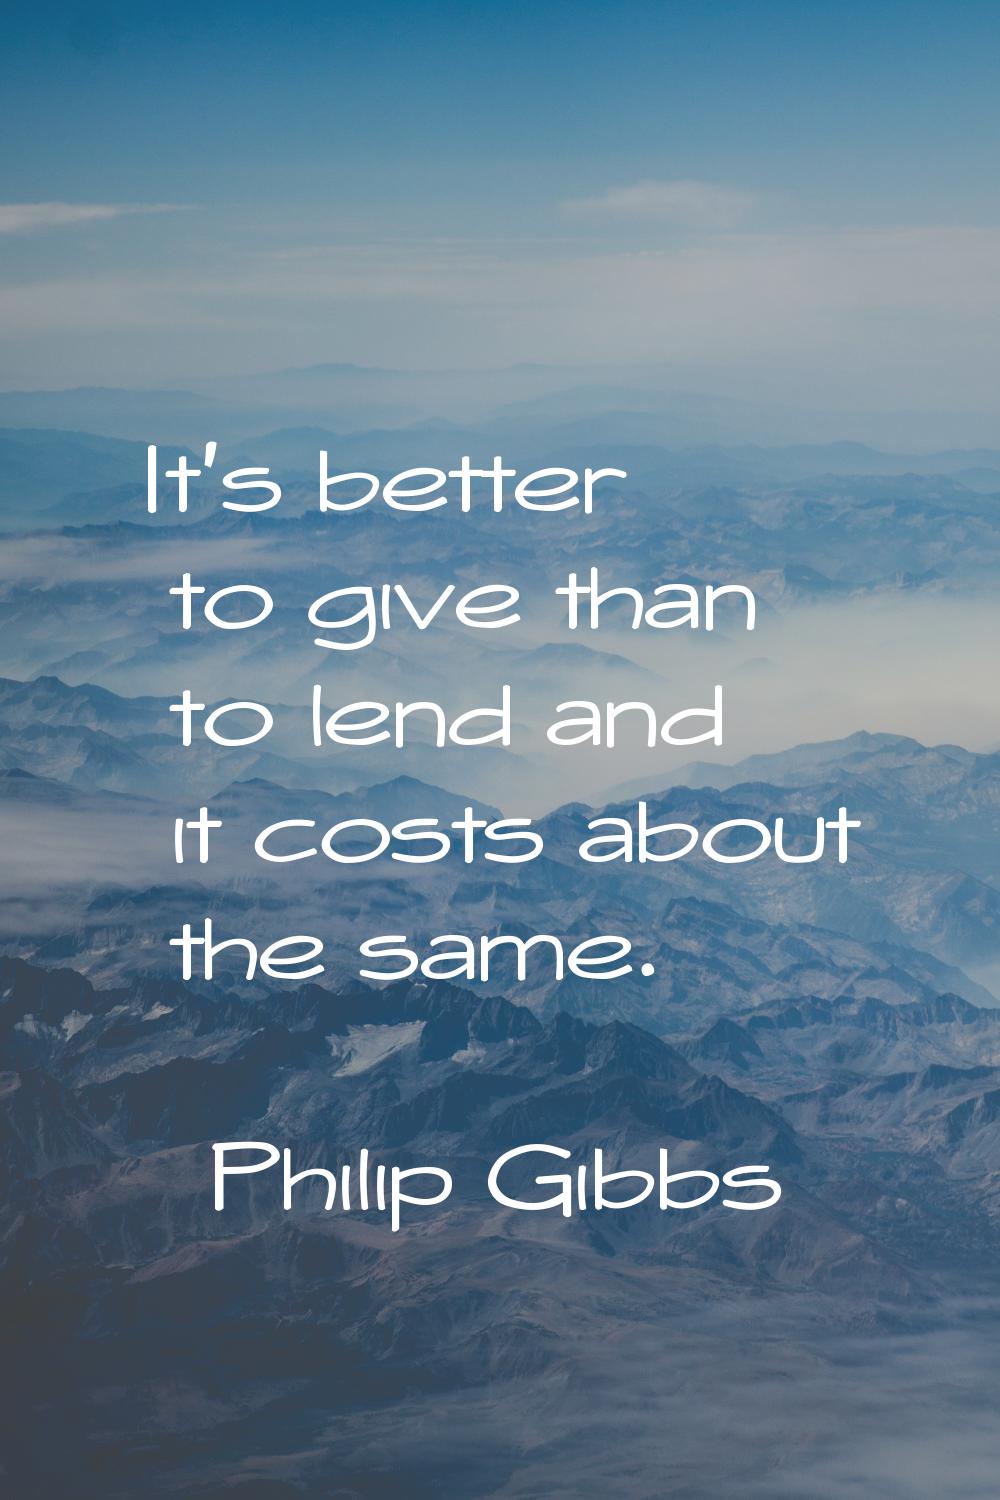 It's better to give than to lend and it costs about the same.